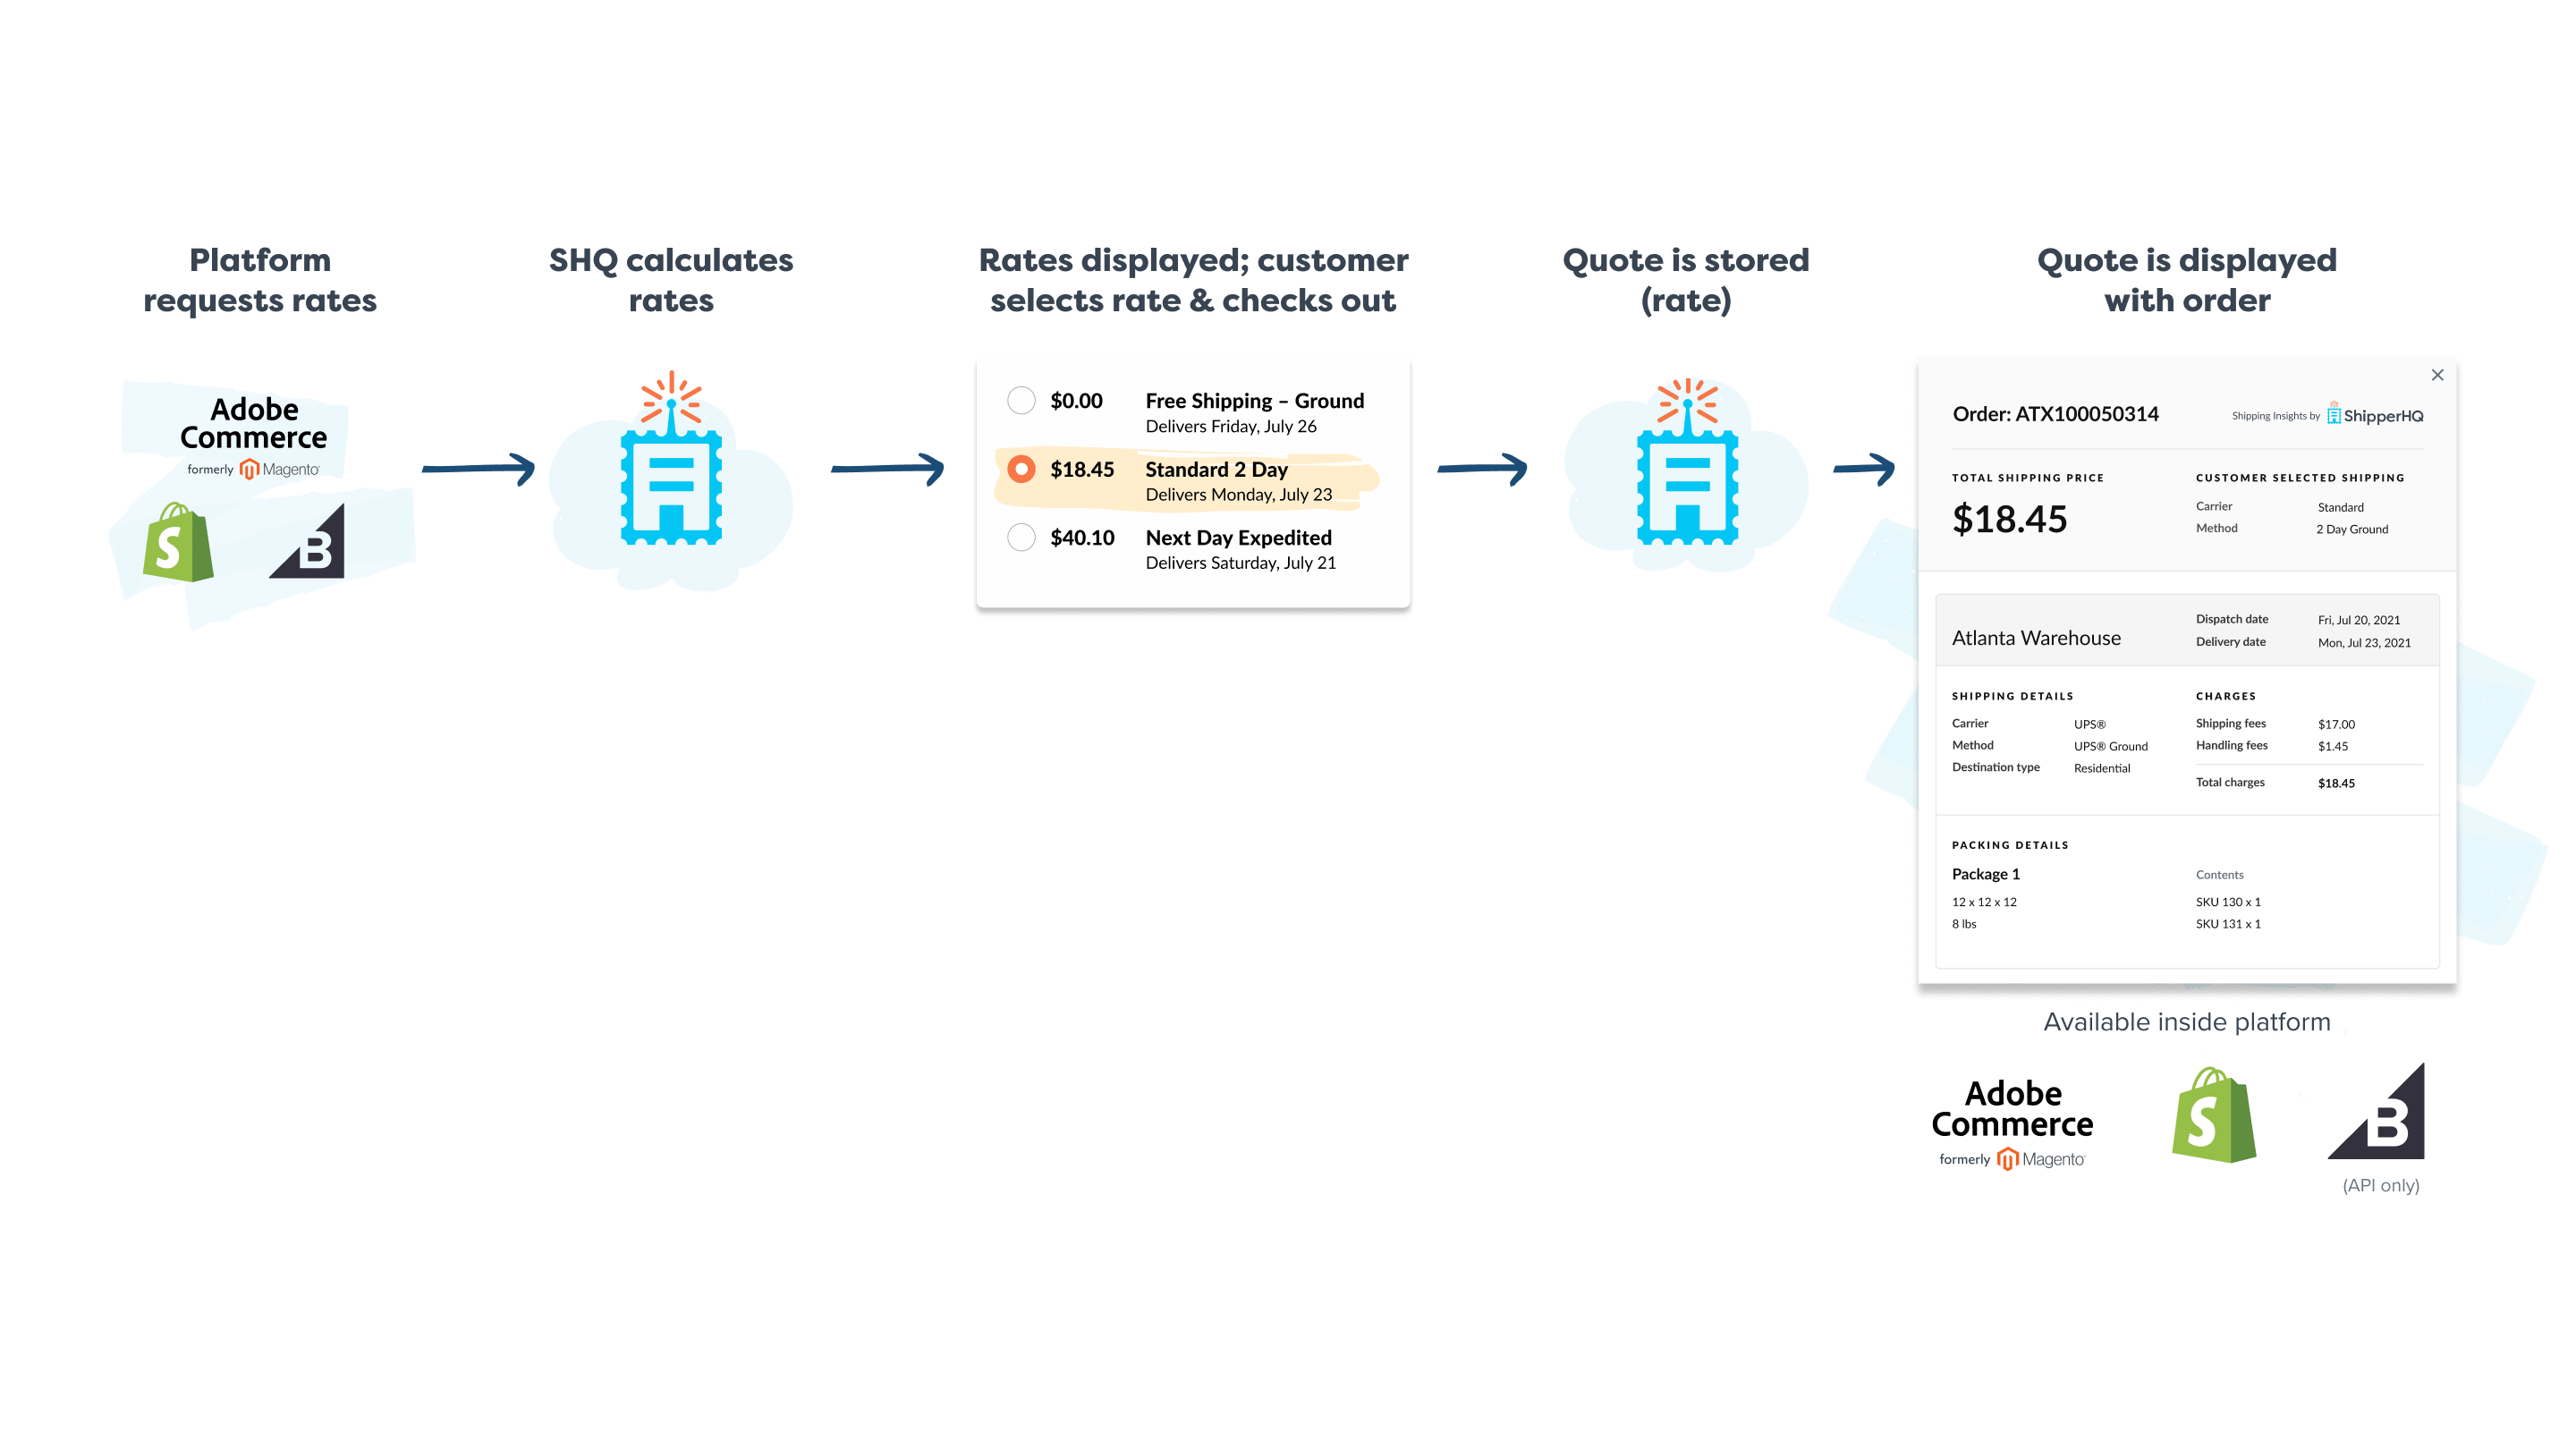 Workflow for order conversion after Shipping Insights
